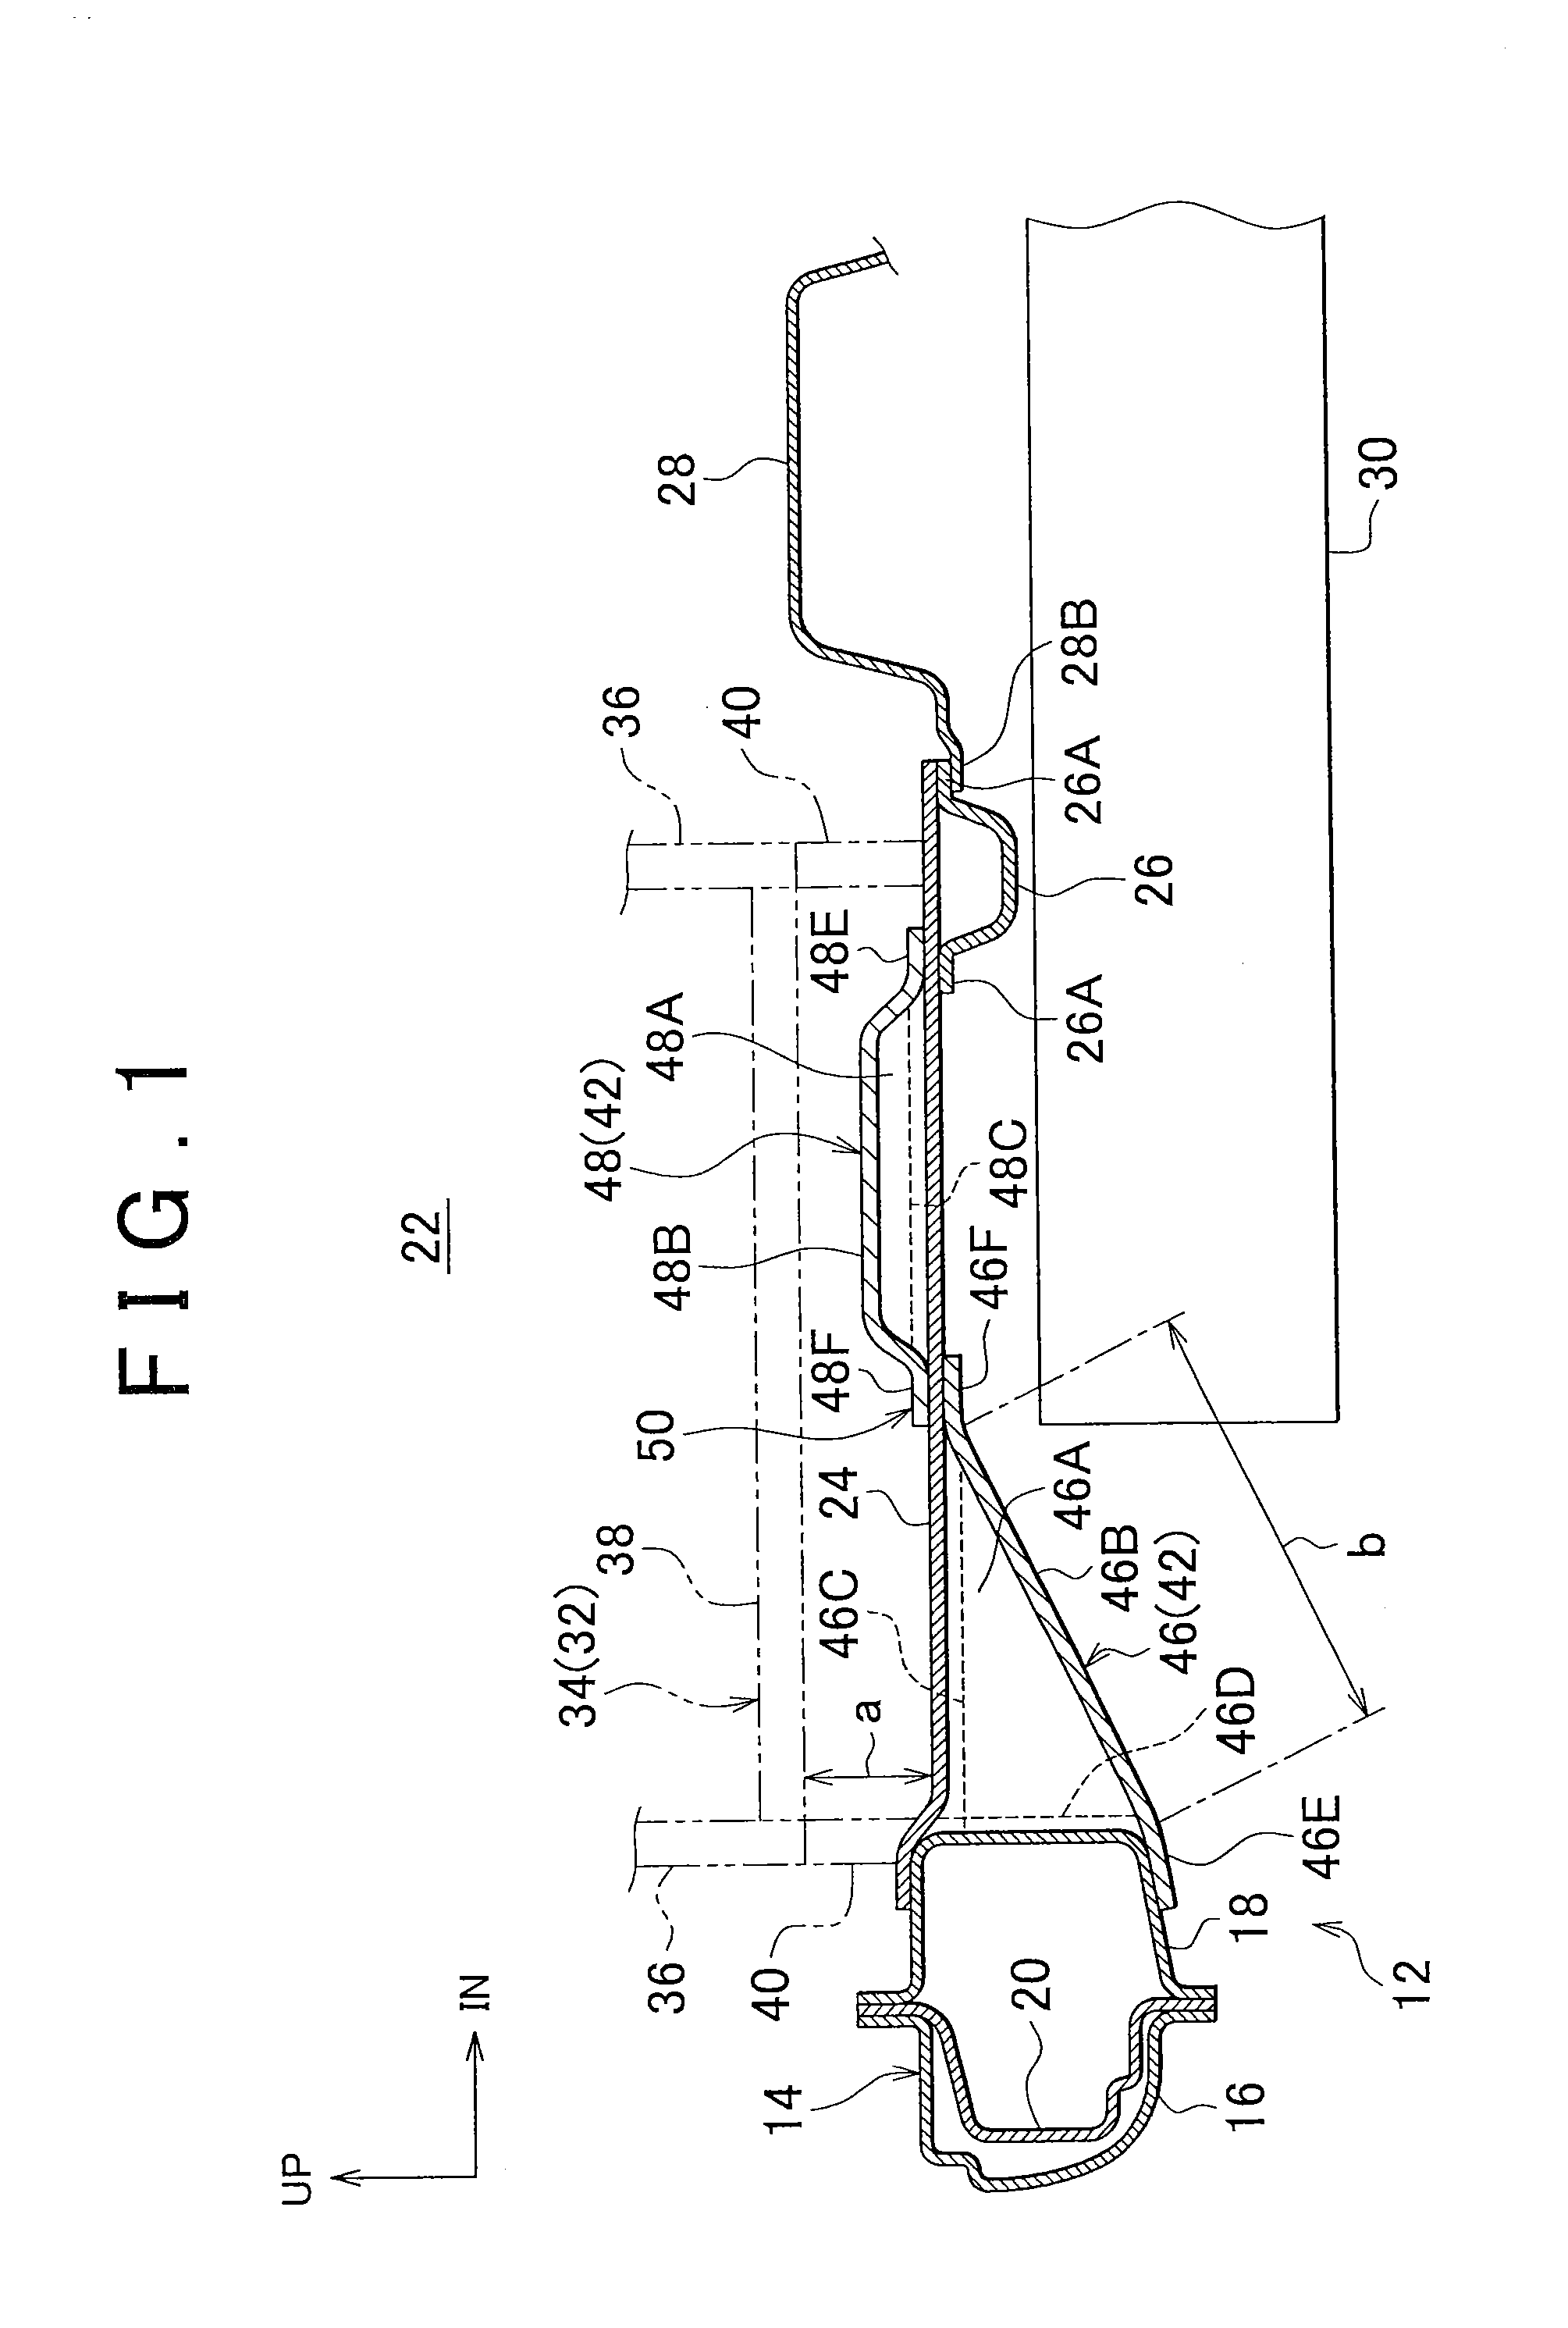 Battery protection structure for automobile